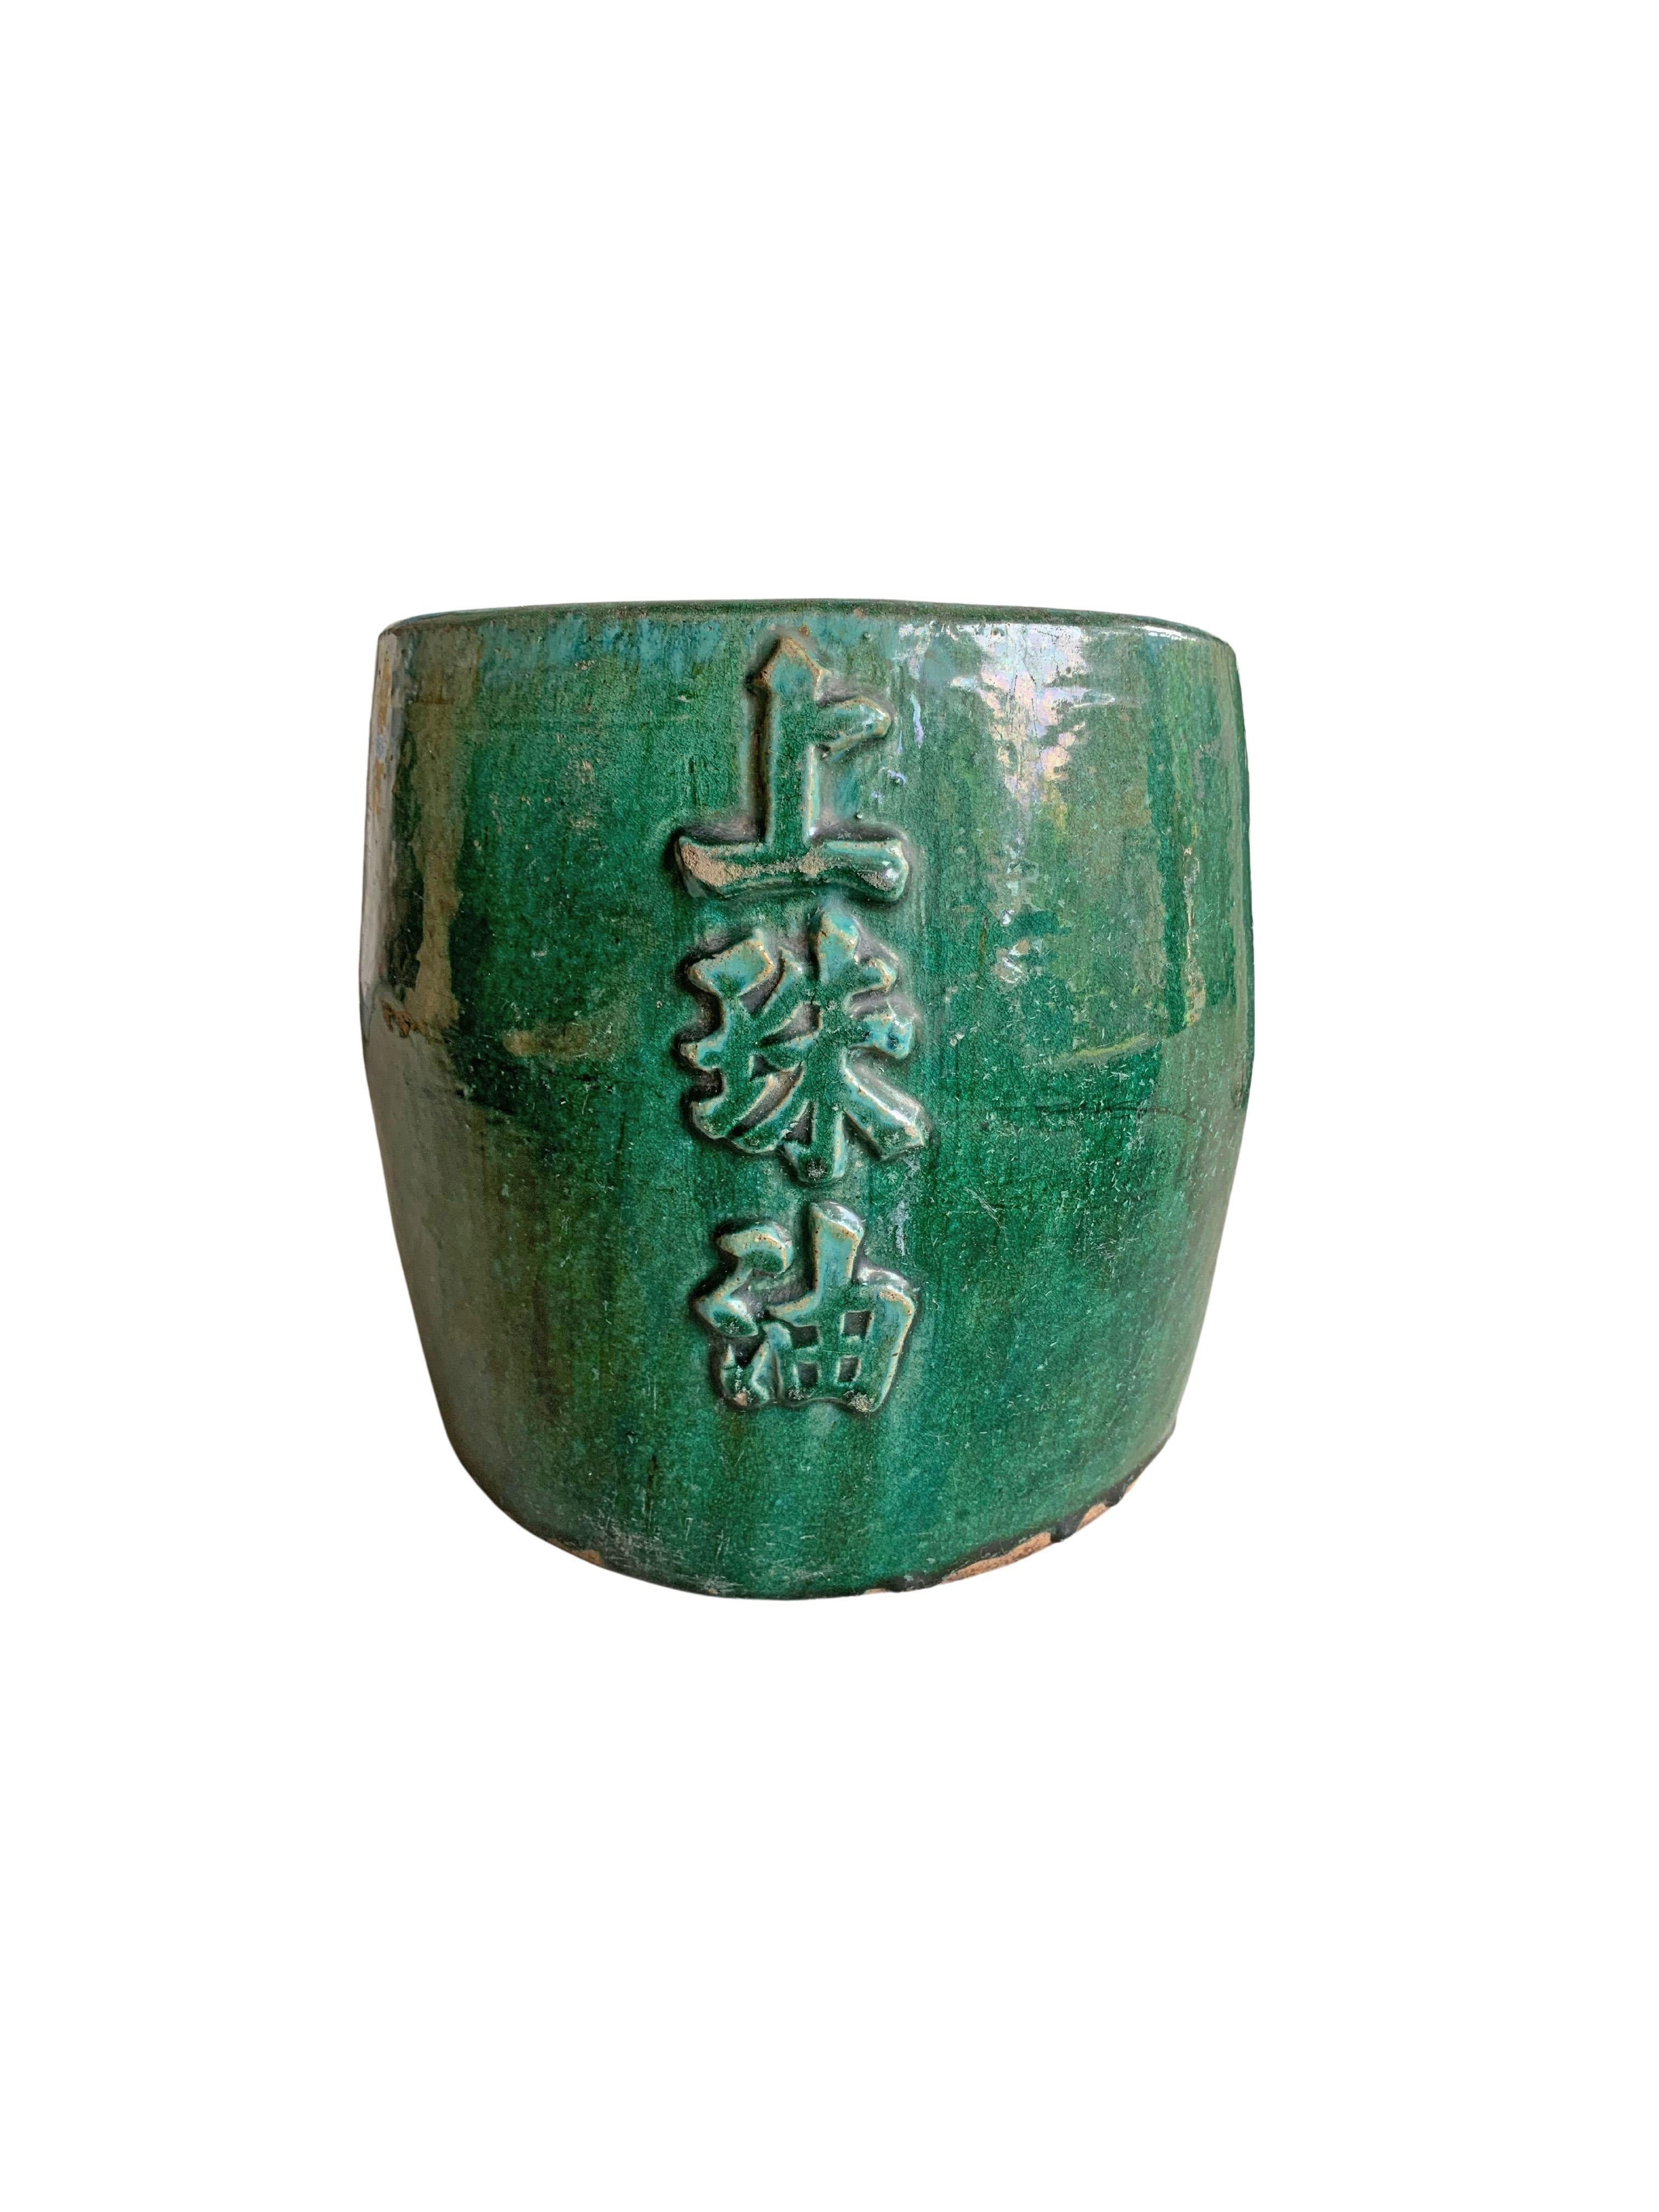 A wonderful green glaze adorns this early 20th century Chinese ceramic pork lard storage jar. The characters on its front side translate to 